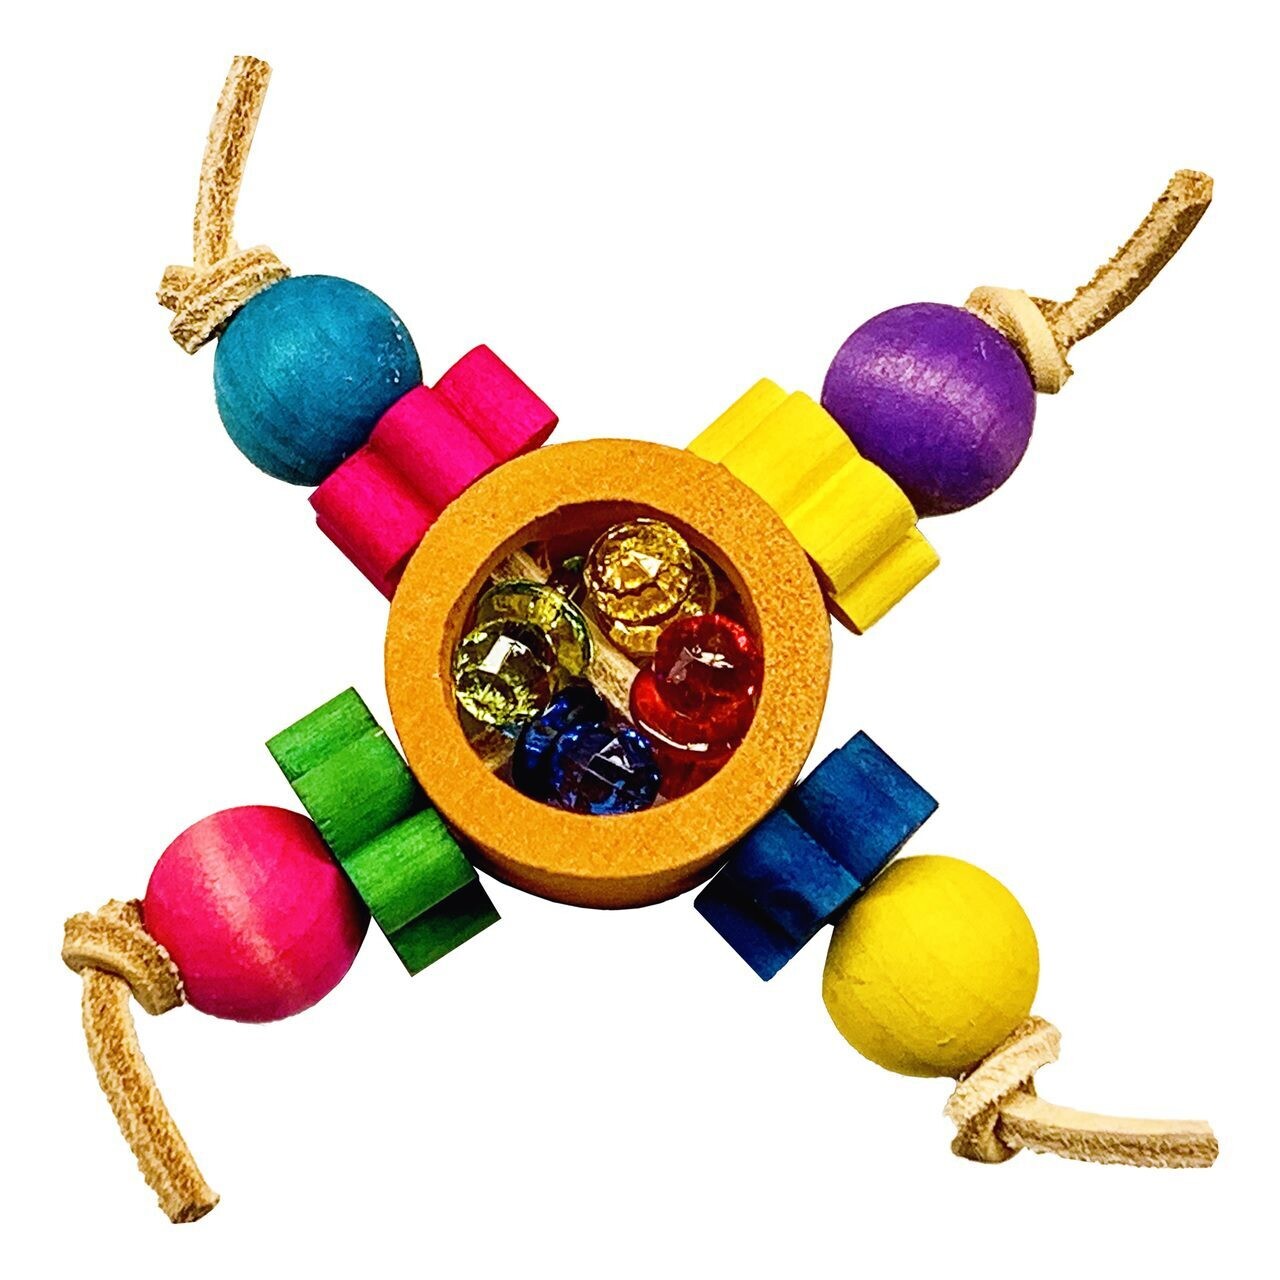 Mini Treasure Foot Toy for Medium Birds made in USA with a combination of colorful wood flowers and beads surrounding acrylic pacifiers encapsulated in a wooden circle bound together by leather. by Sc